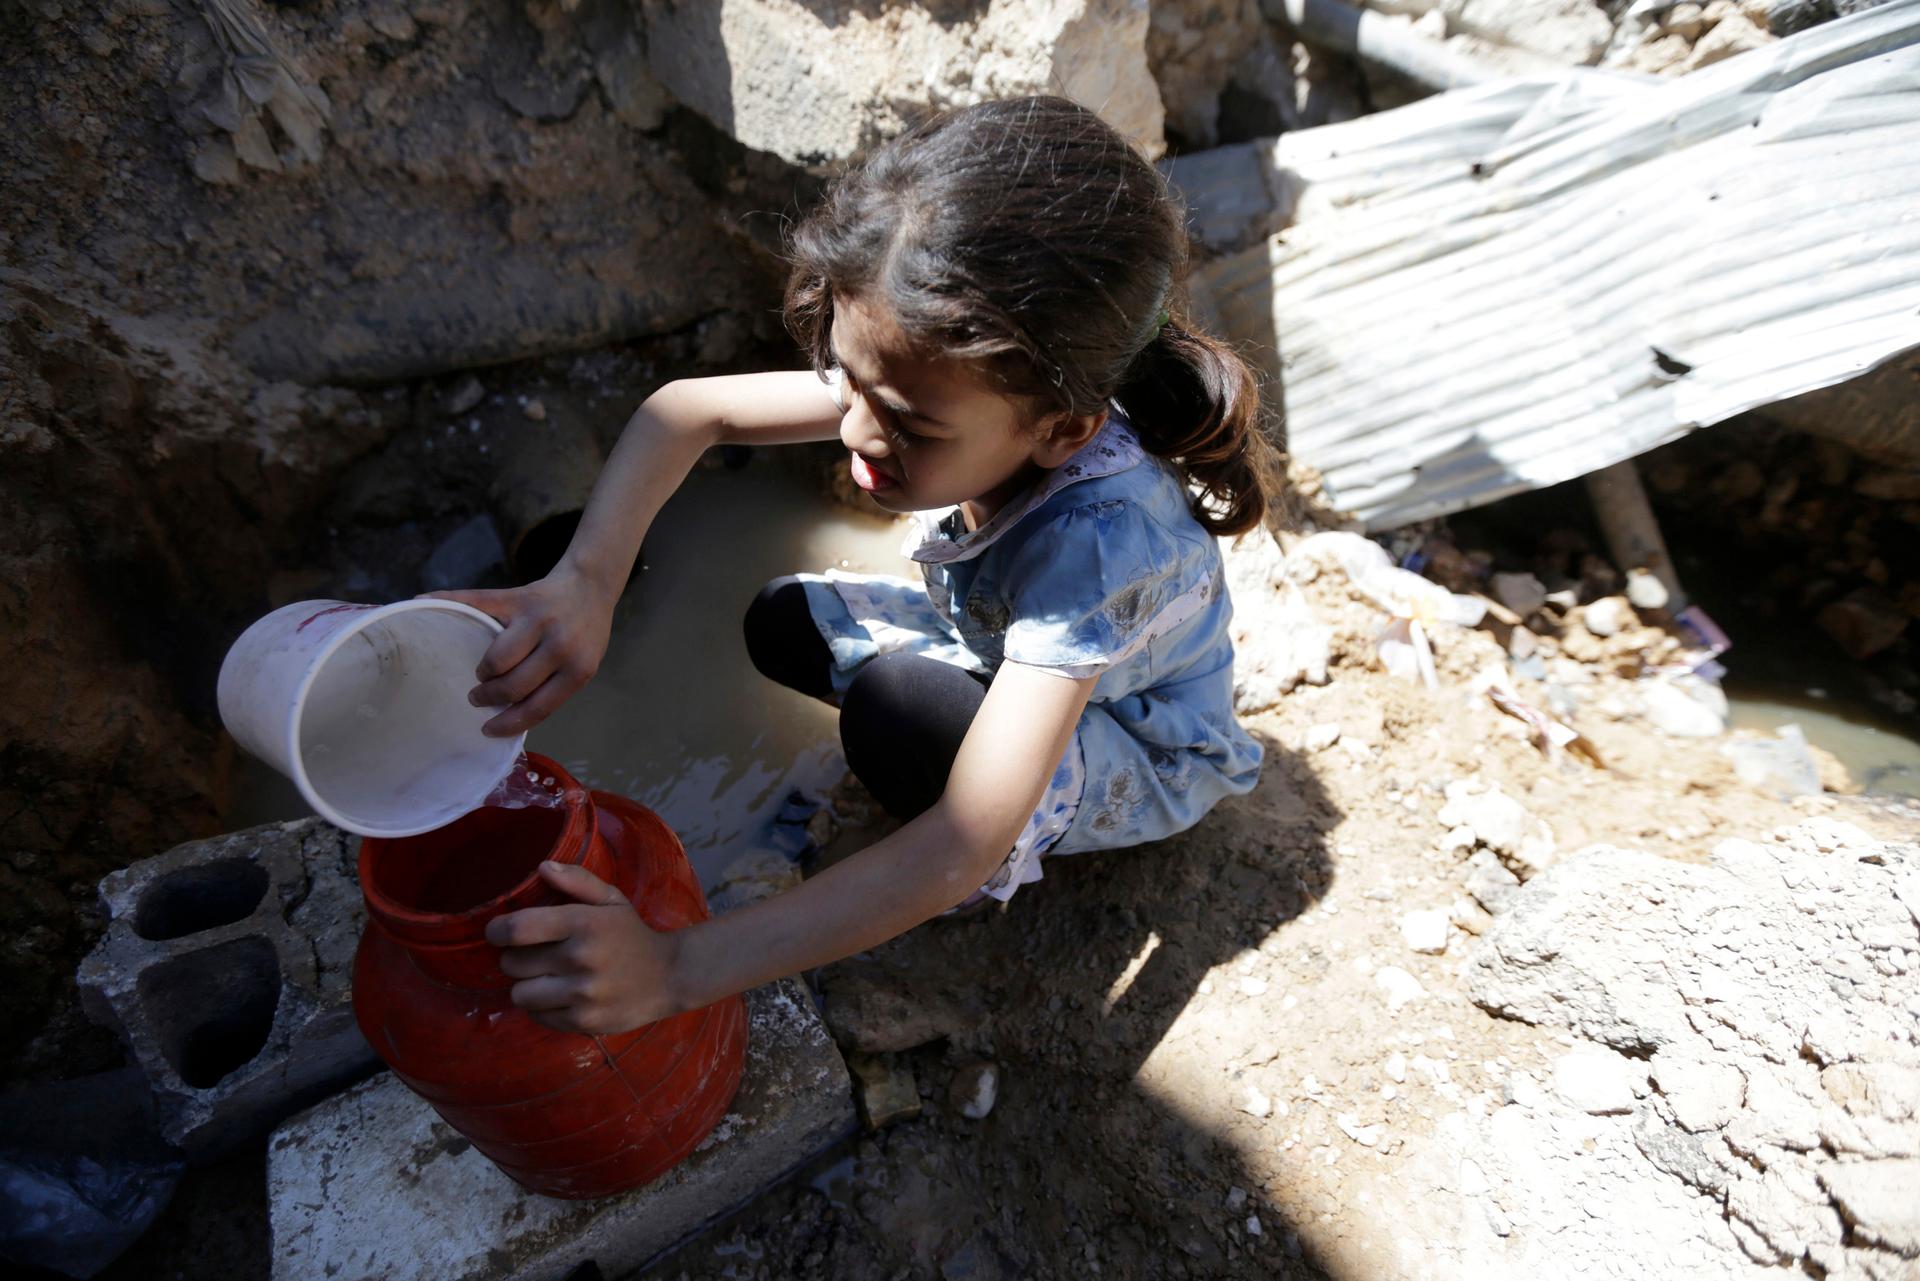 Aya, 8, fills containers with water obtained from a pool formed by damaged and leaking pipes in eastern Ghouta May 2, 2014.